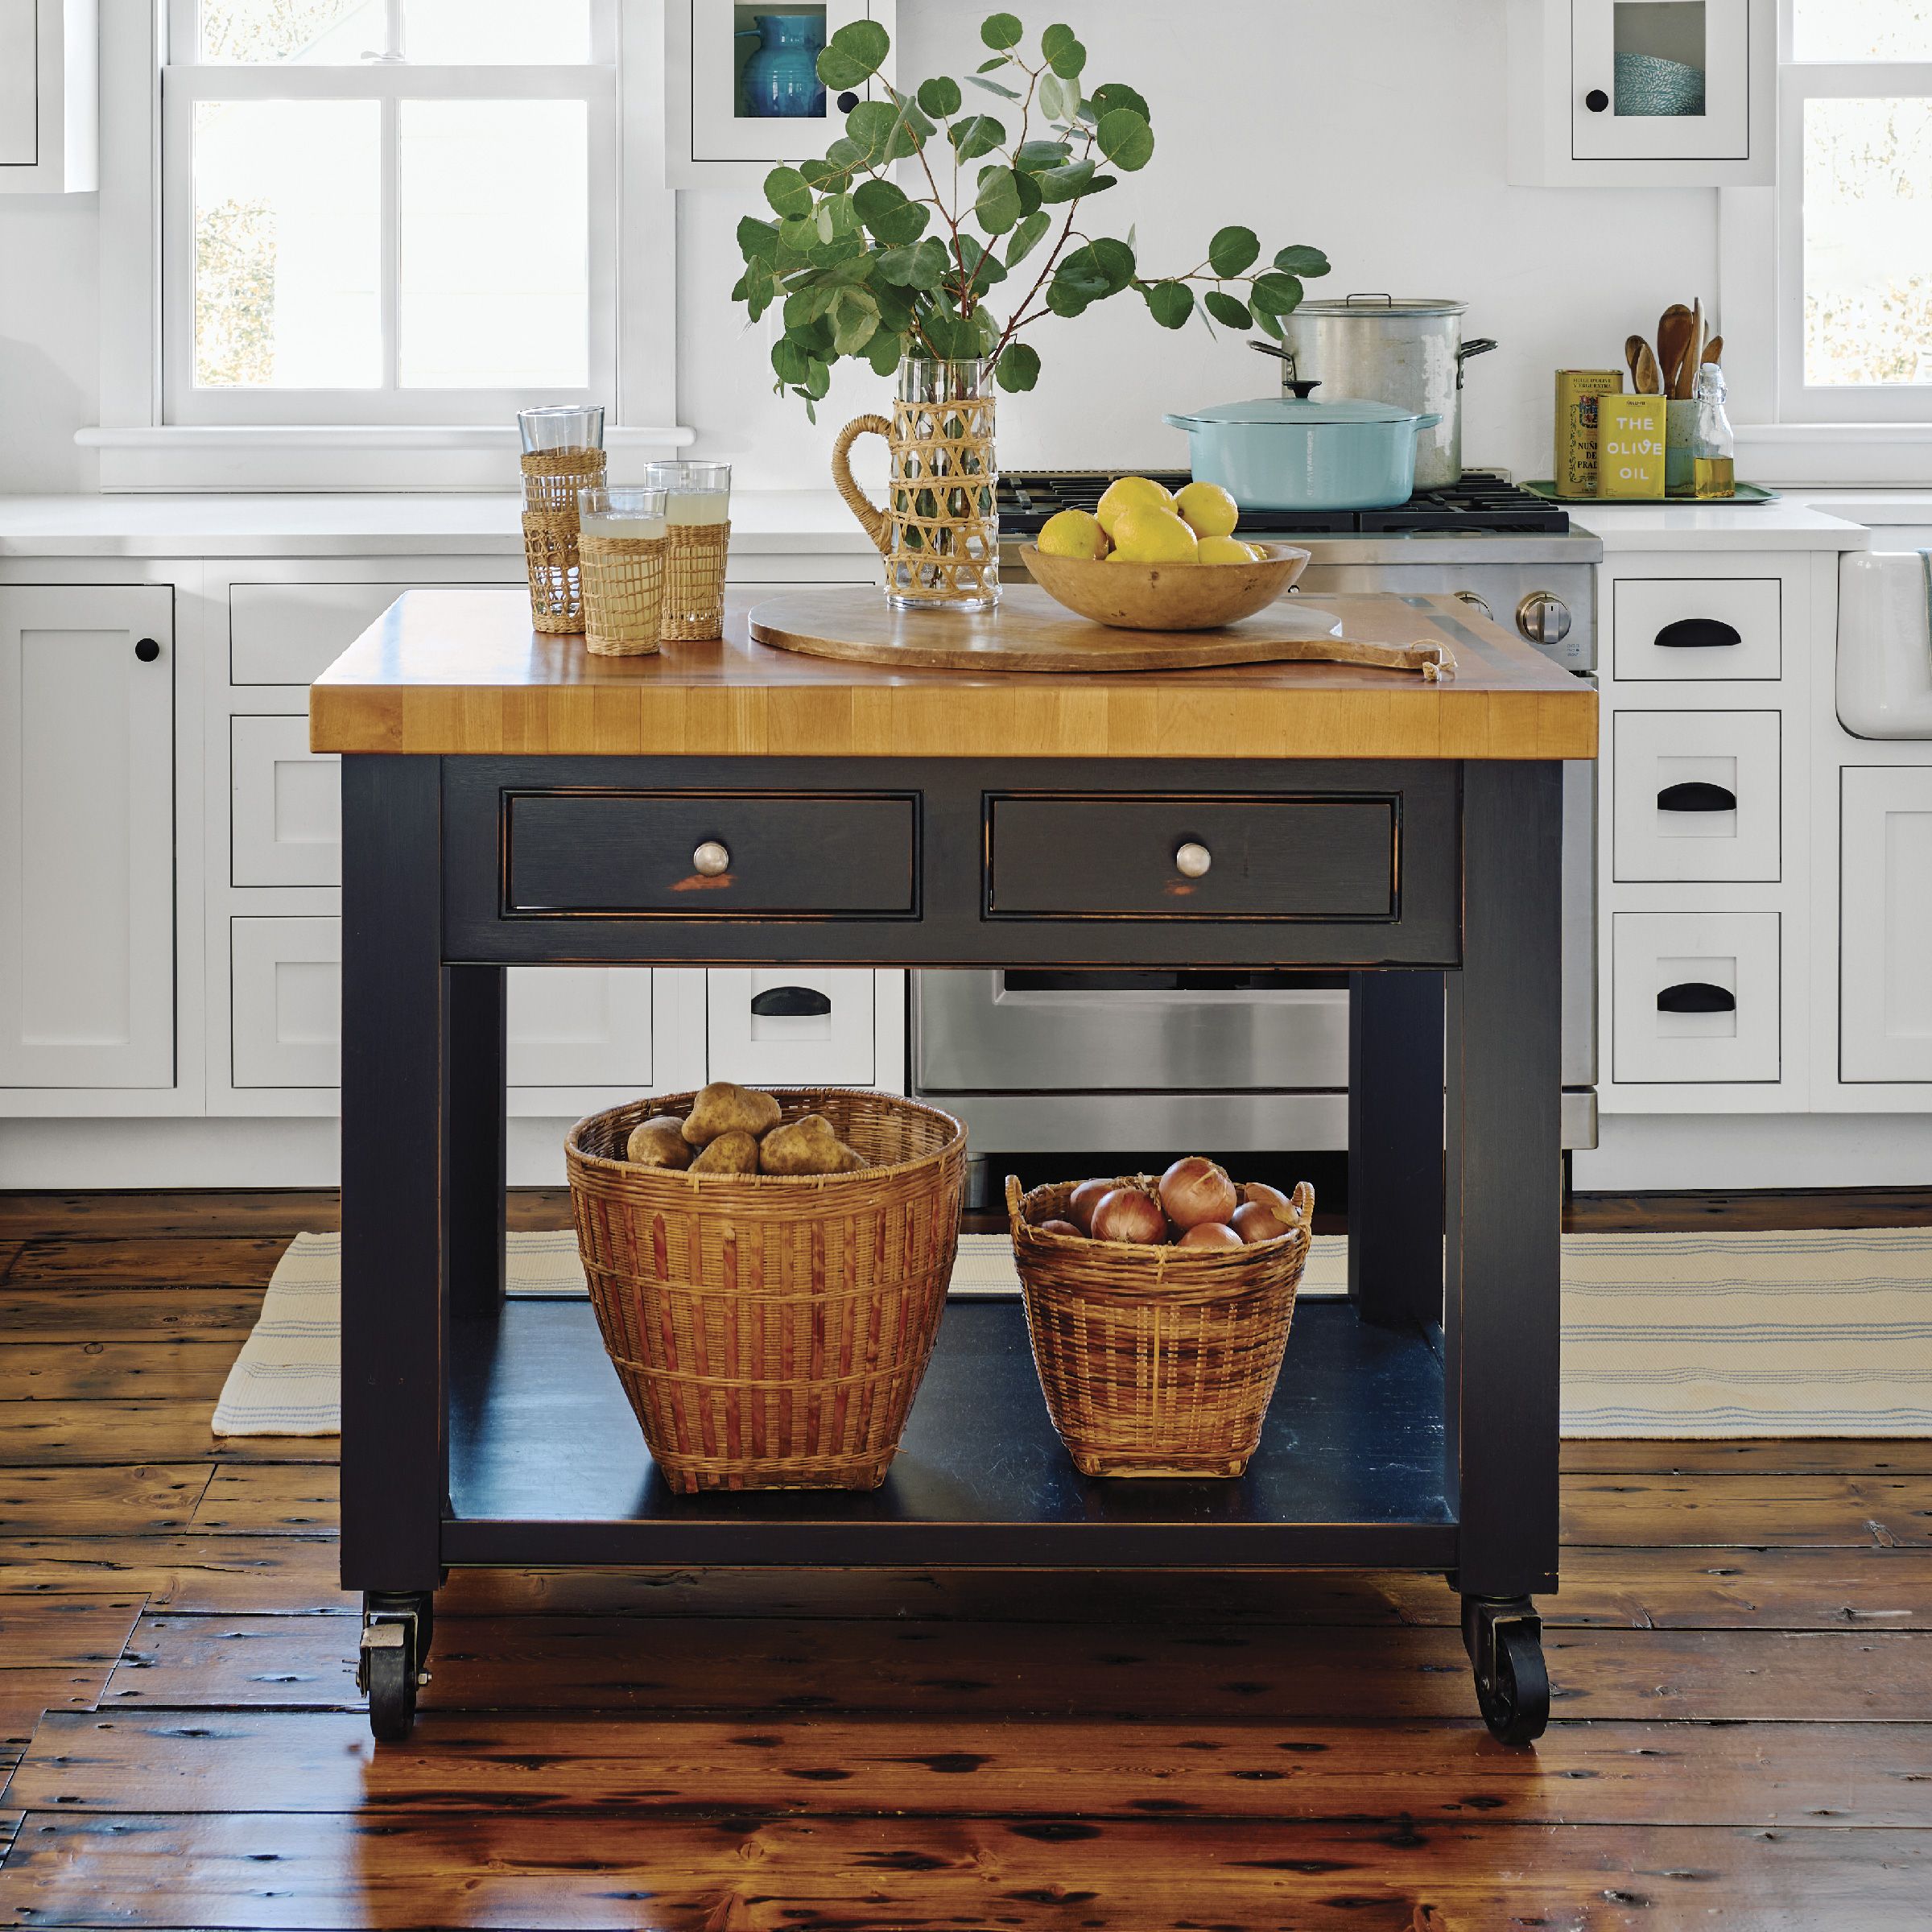 A kitchen island on wheels with a butcher block top.